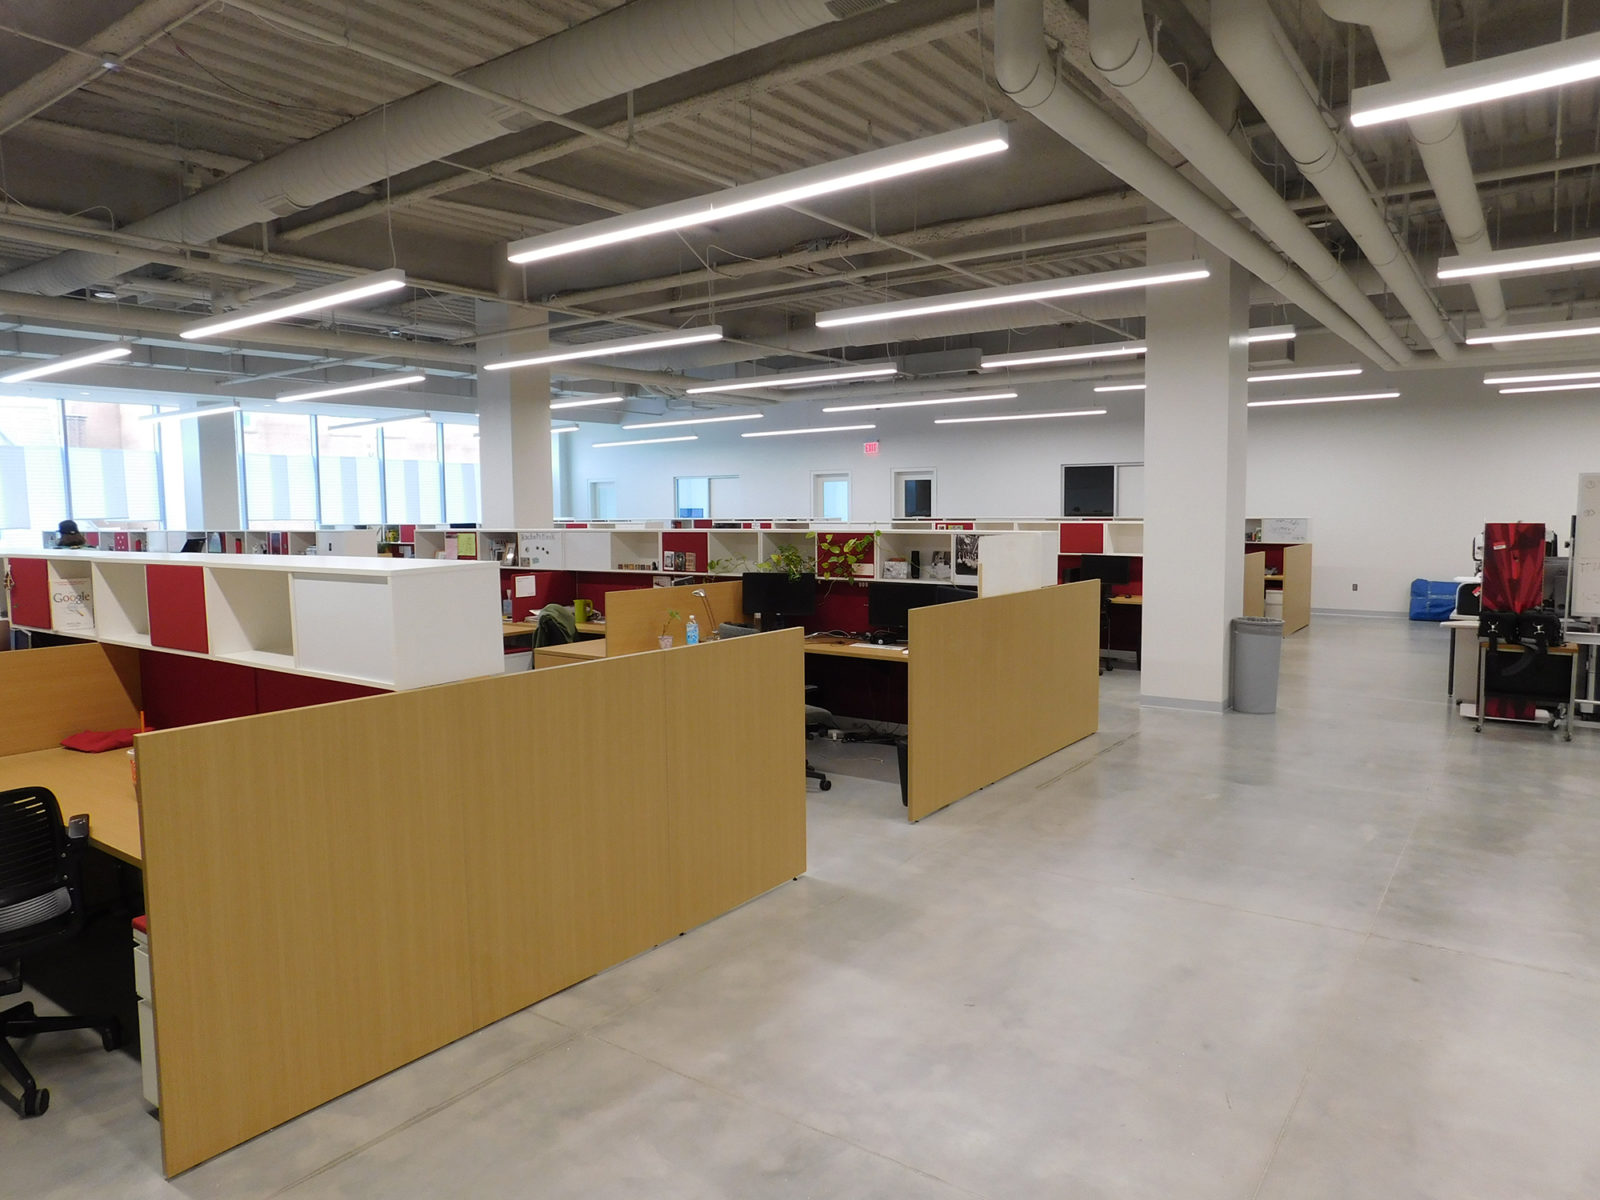 Open office space with workstations - light woodgrain surfaces and gallery panels, white and red overheads. Exposed ceilings and concrete floors.